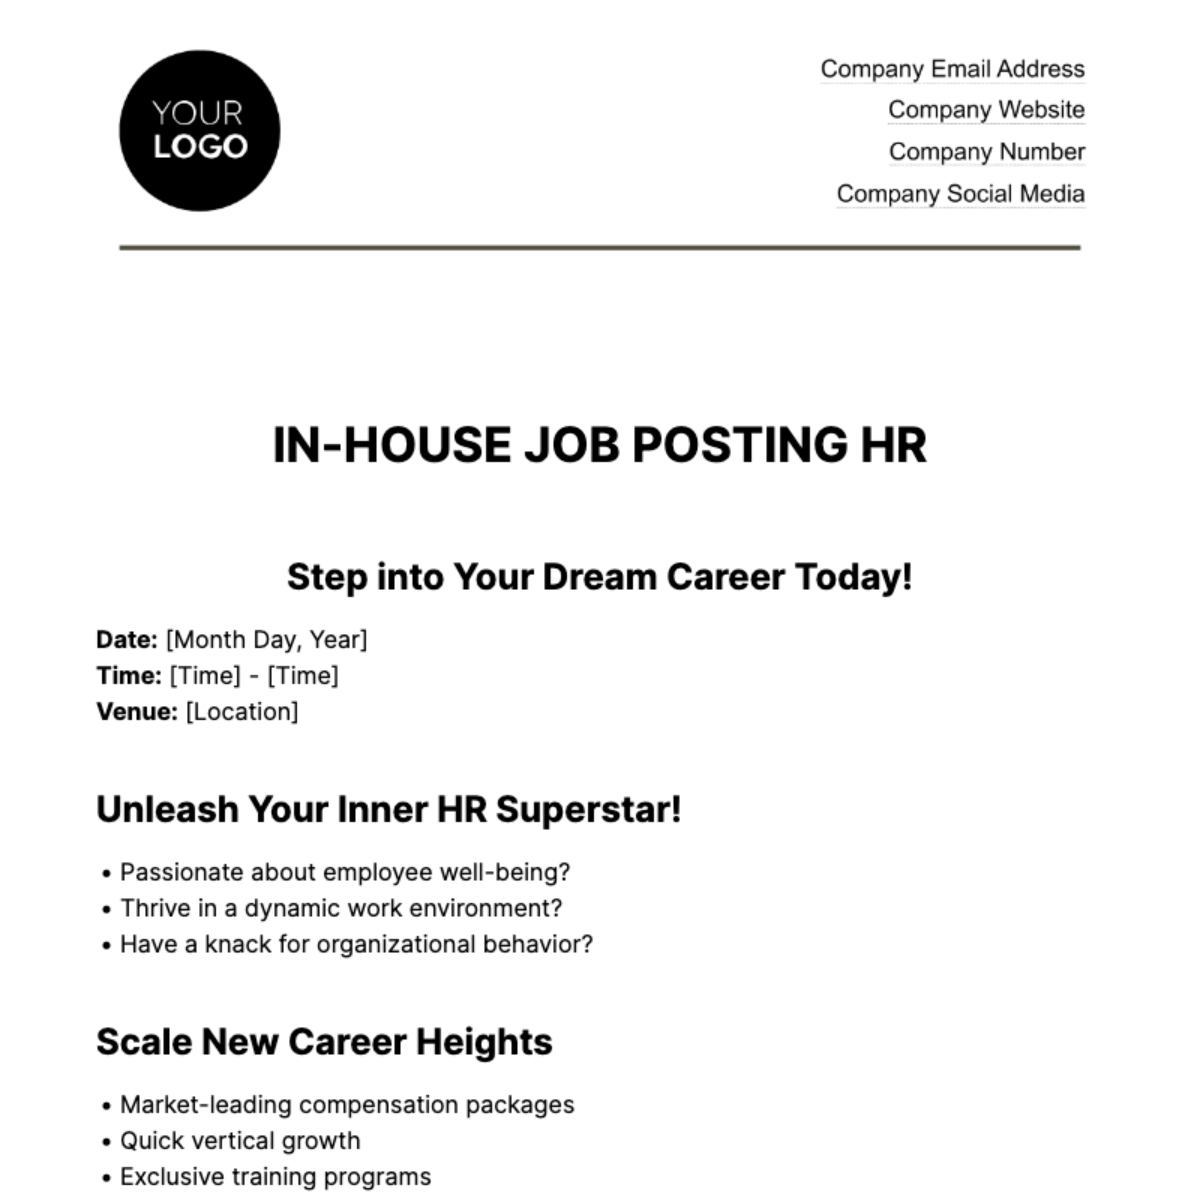 In-house Job Posting HR Template